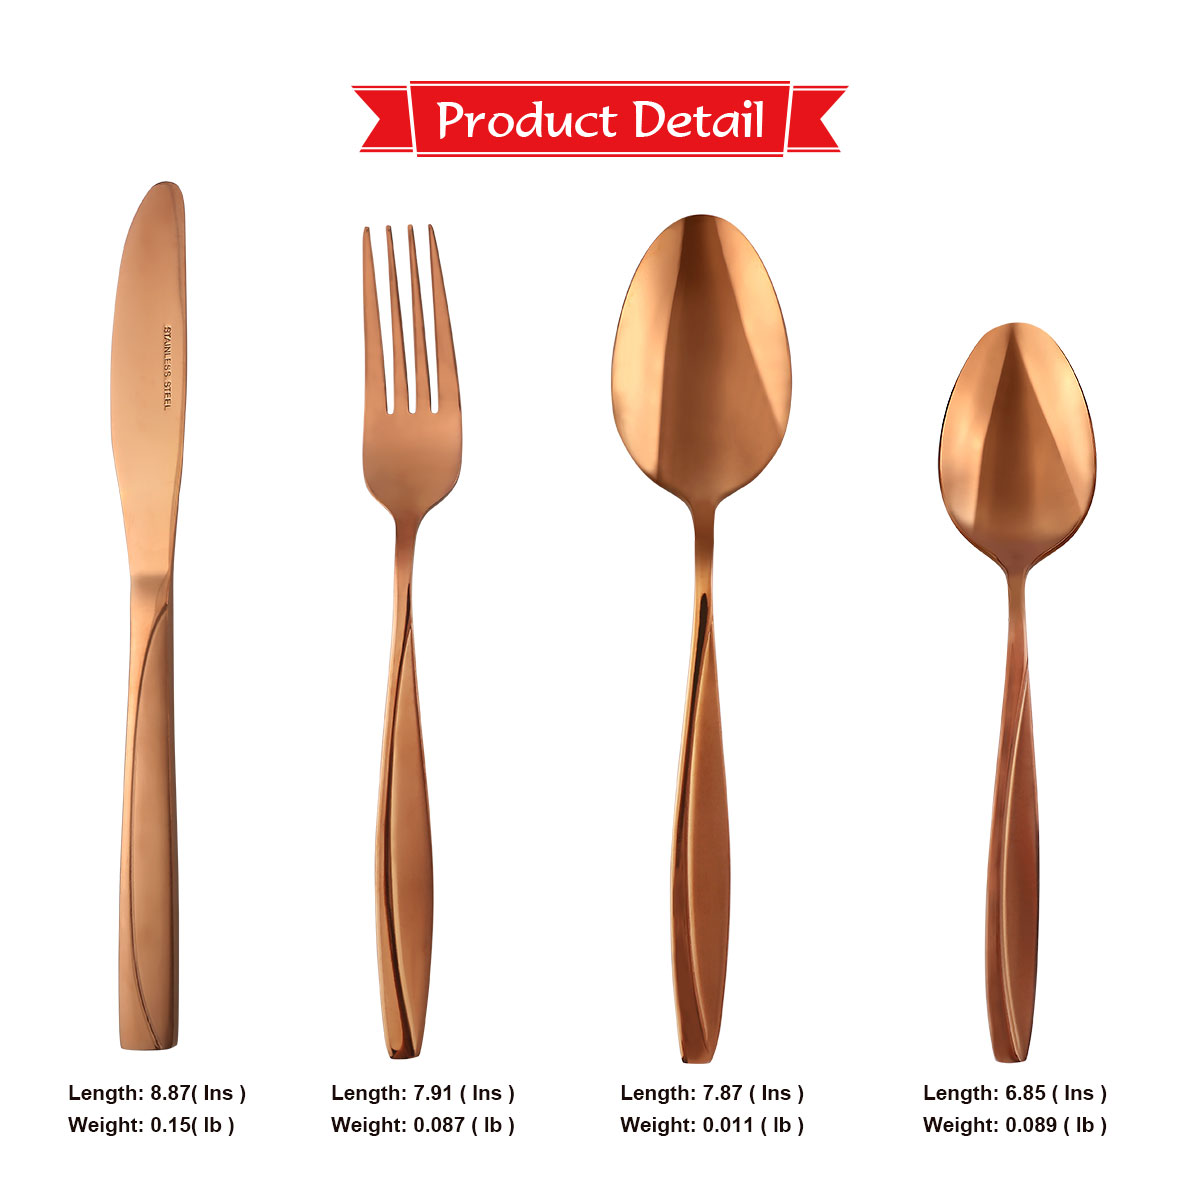 MDEALY 24-Piece Cooper Silverware Kitchen Utensil Set Good Quality Stainless Steel Flatware Cutlery Service for 6 Include Dinner Knife Forks Spoon Teaspoons Elegant Mirror Matted Handle Polished Gift - image 5 of 7